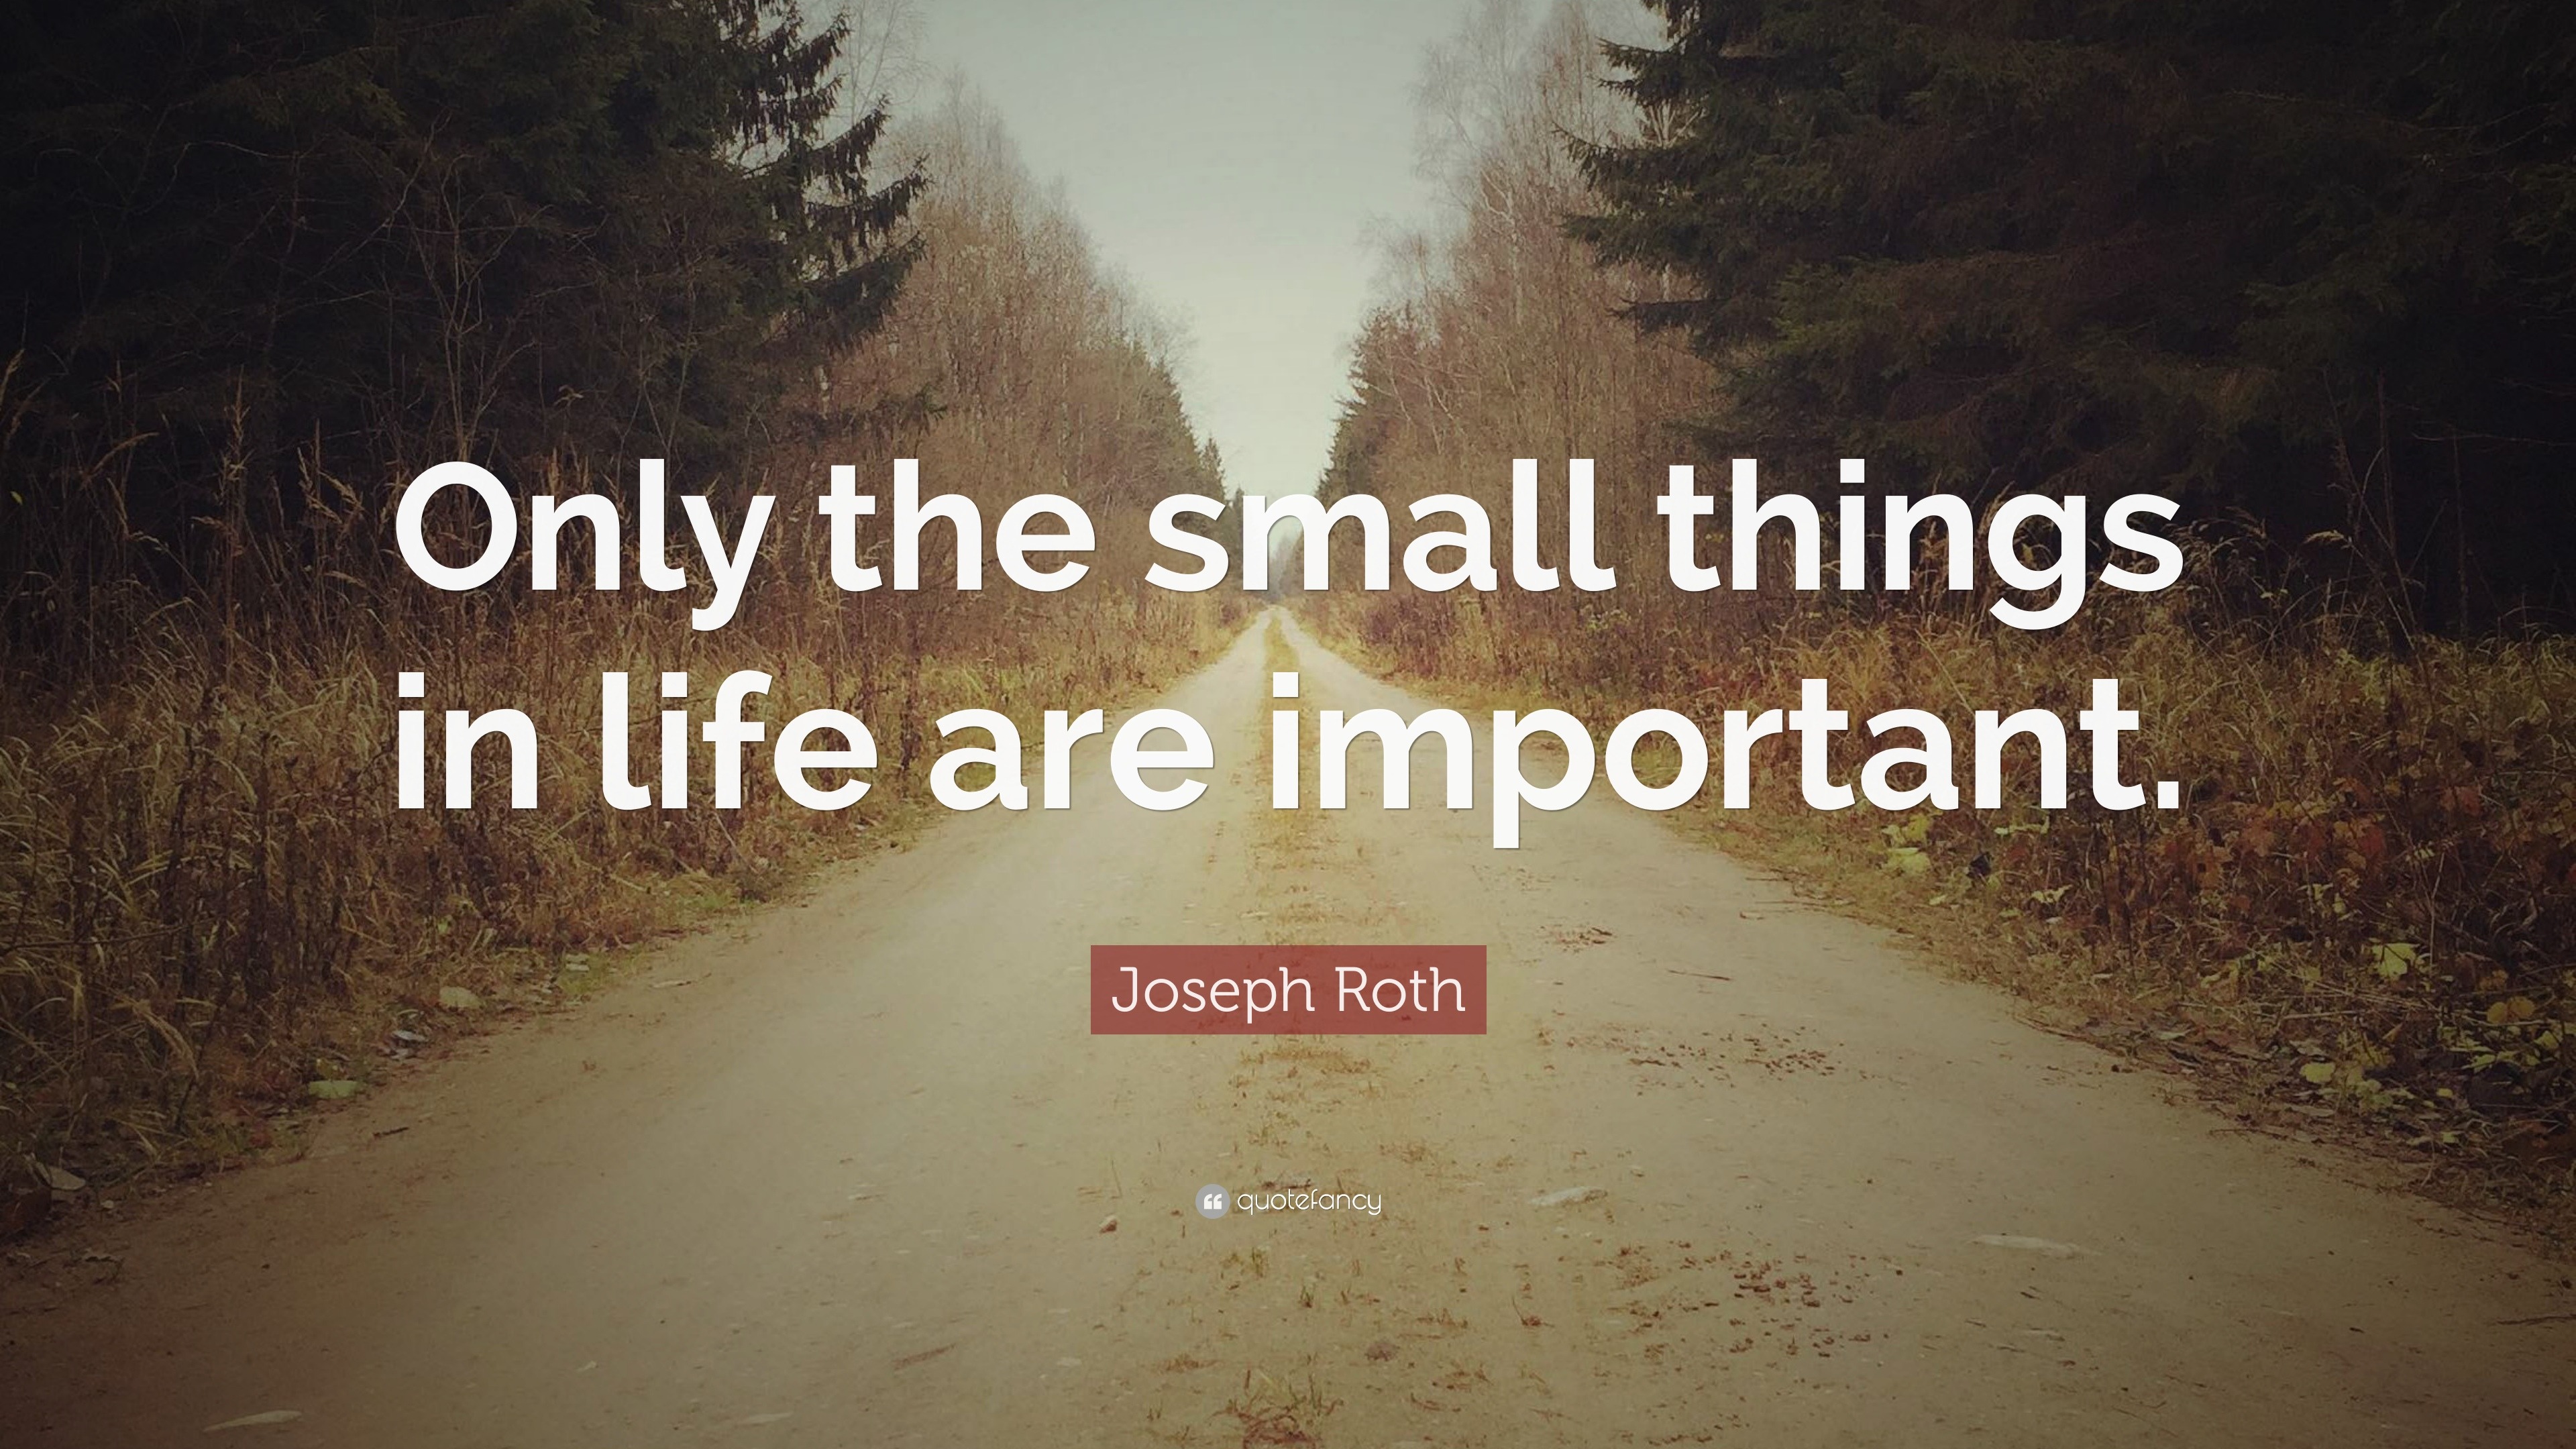 Joseph Roth Quote “only The Small Things In Life Are Important”